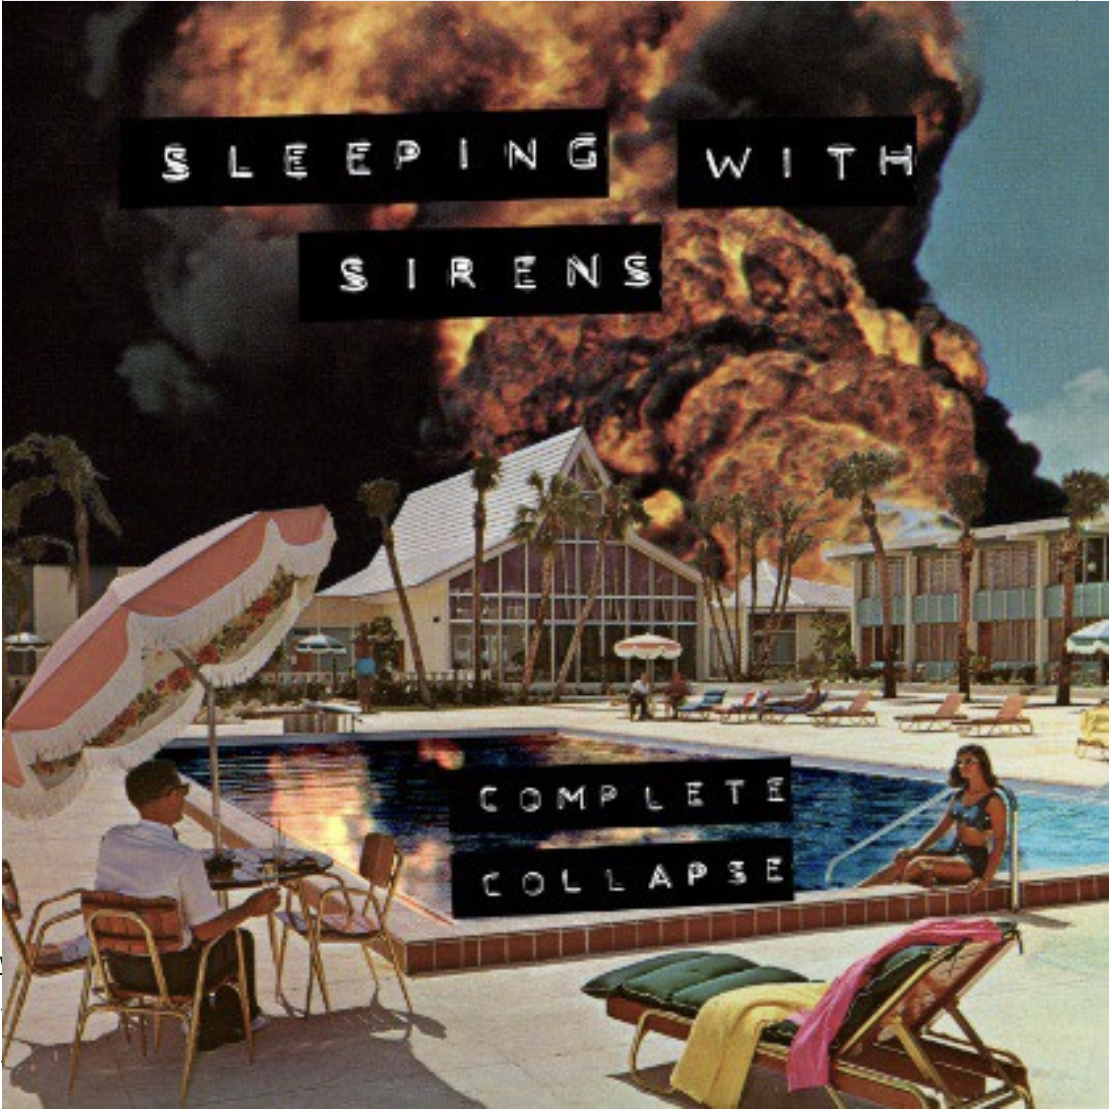 SLEEPING WITH SIRENS Release Music Video “Be Happy (feat. Royal & The Serpent)” 